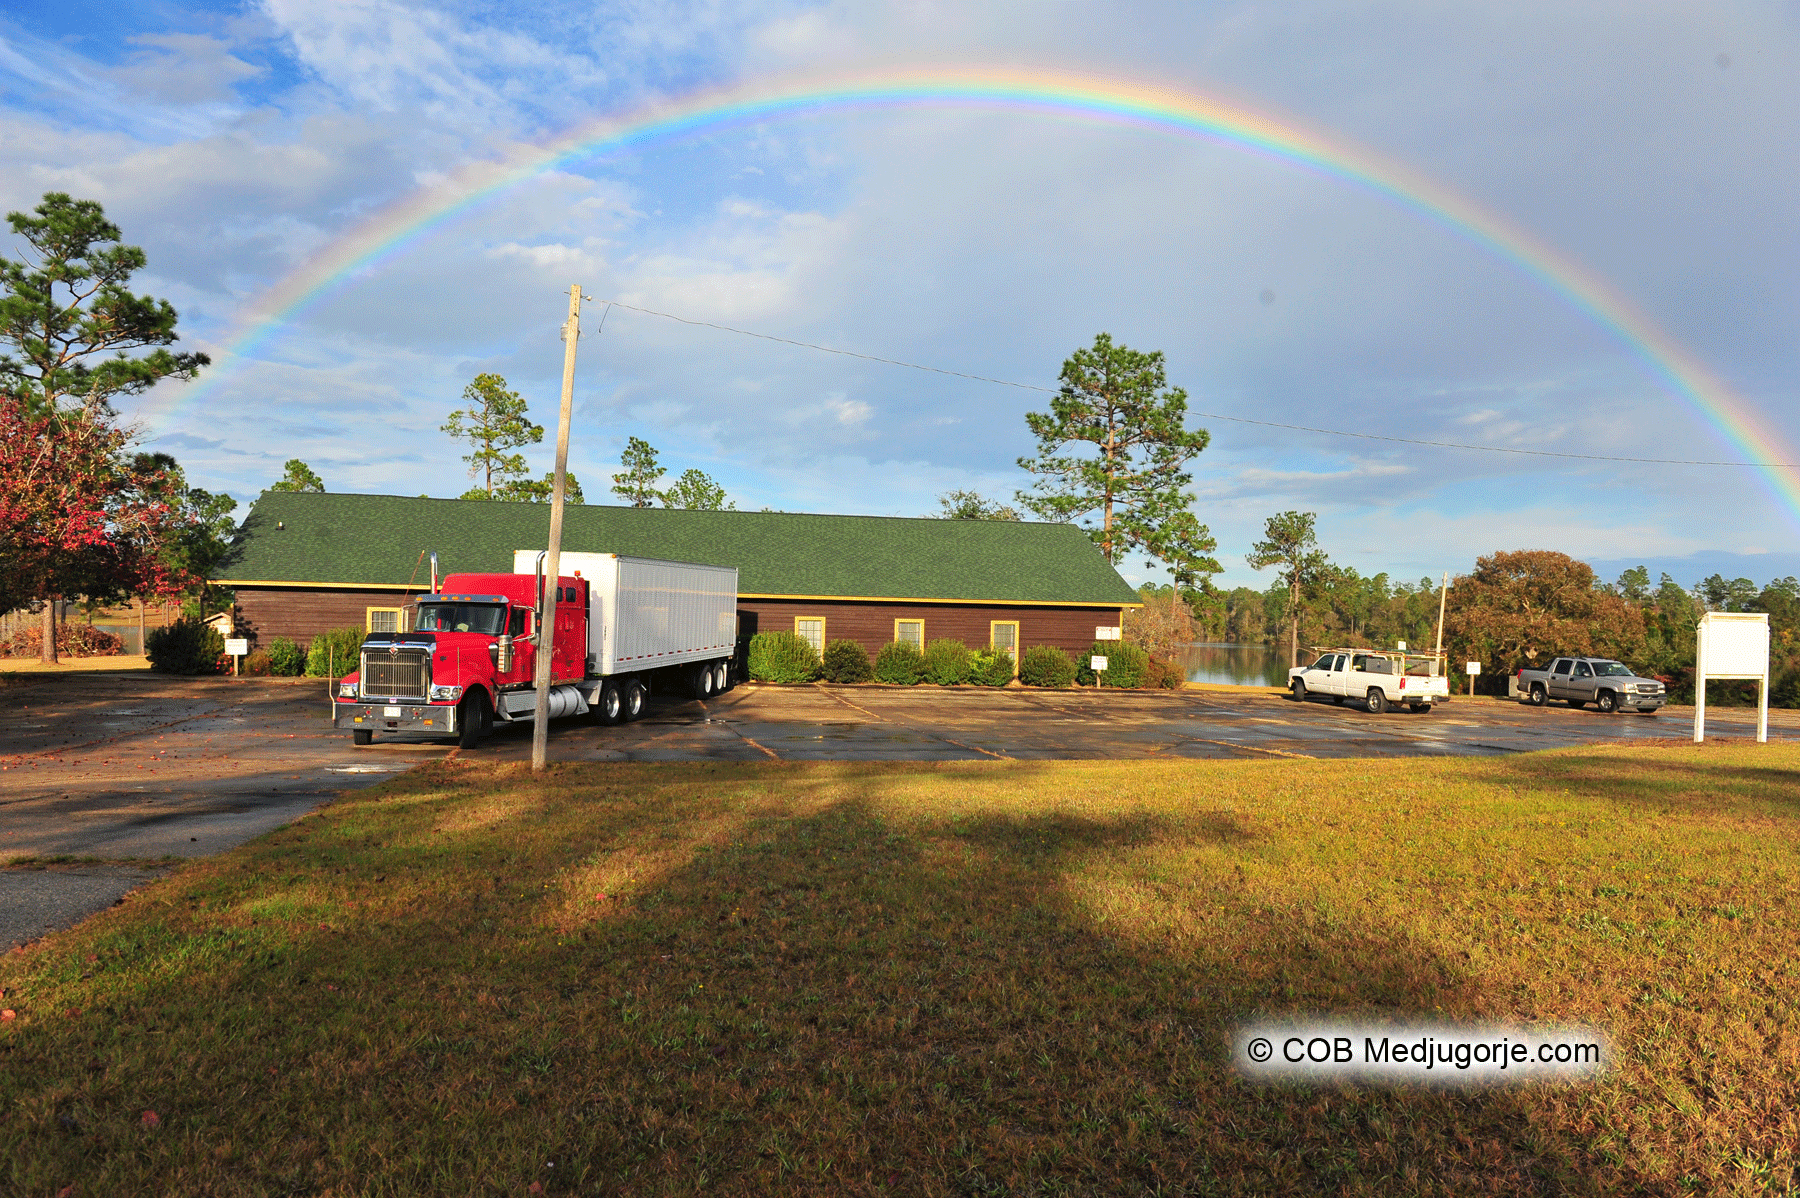 Rainbow in Mississippi